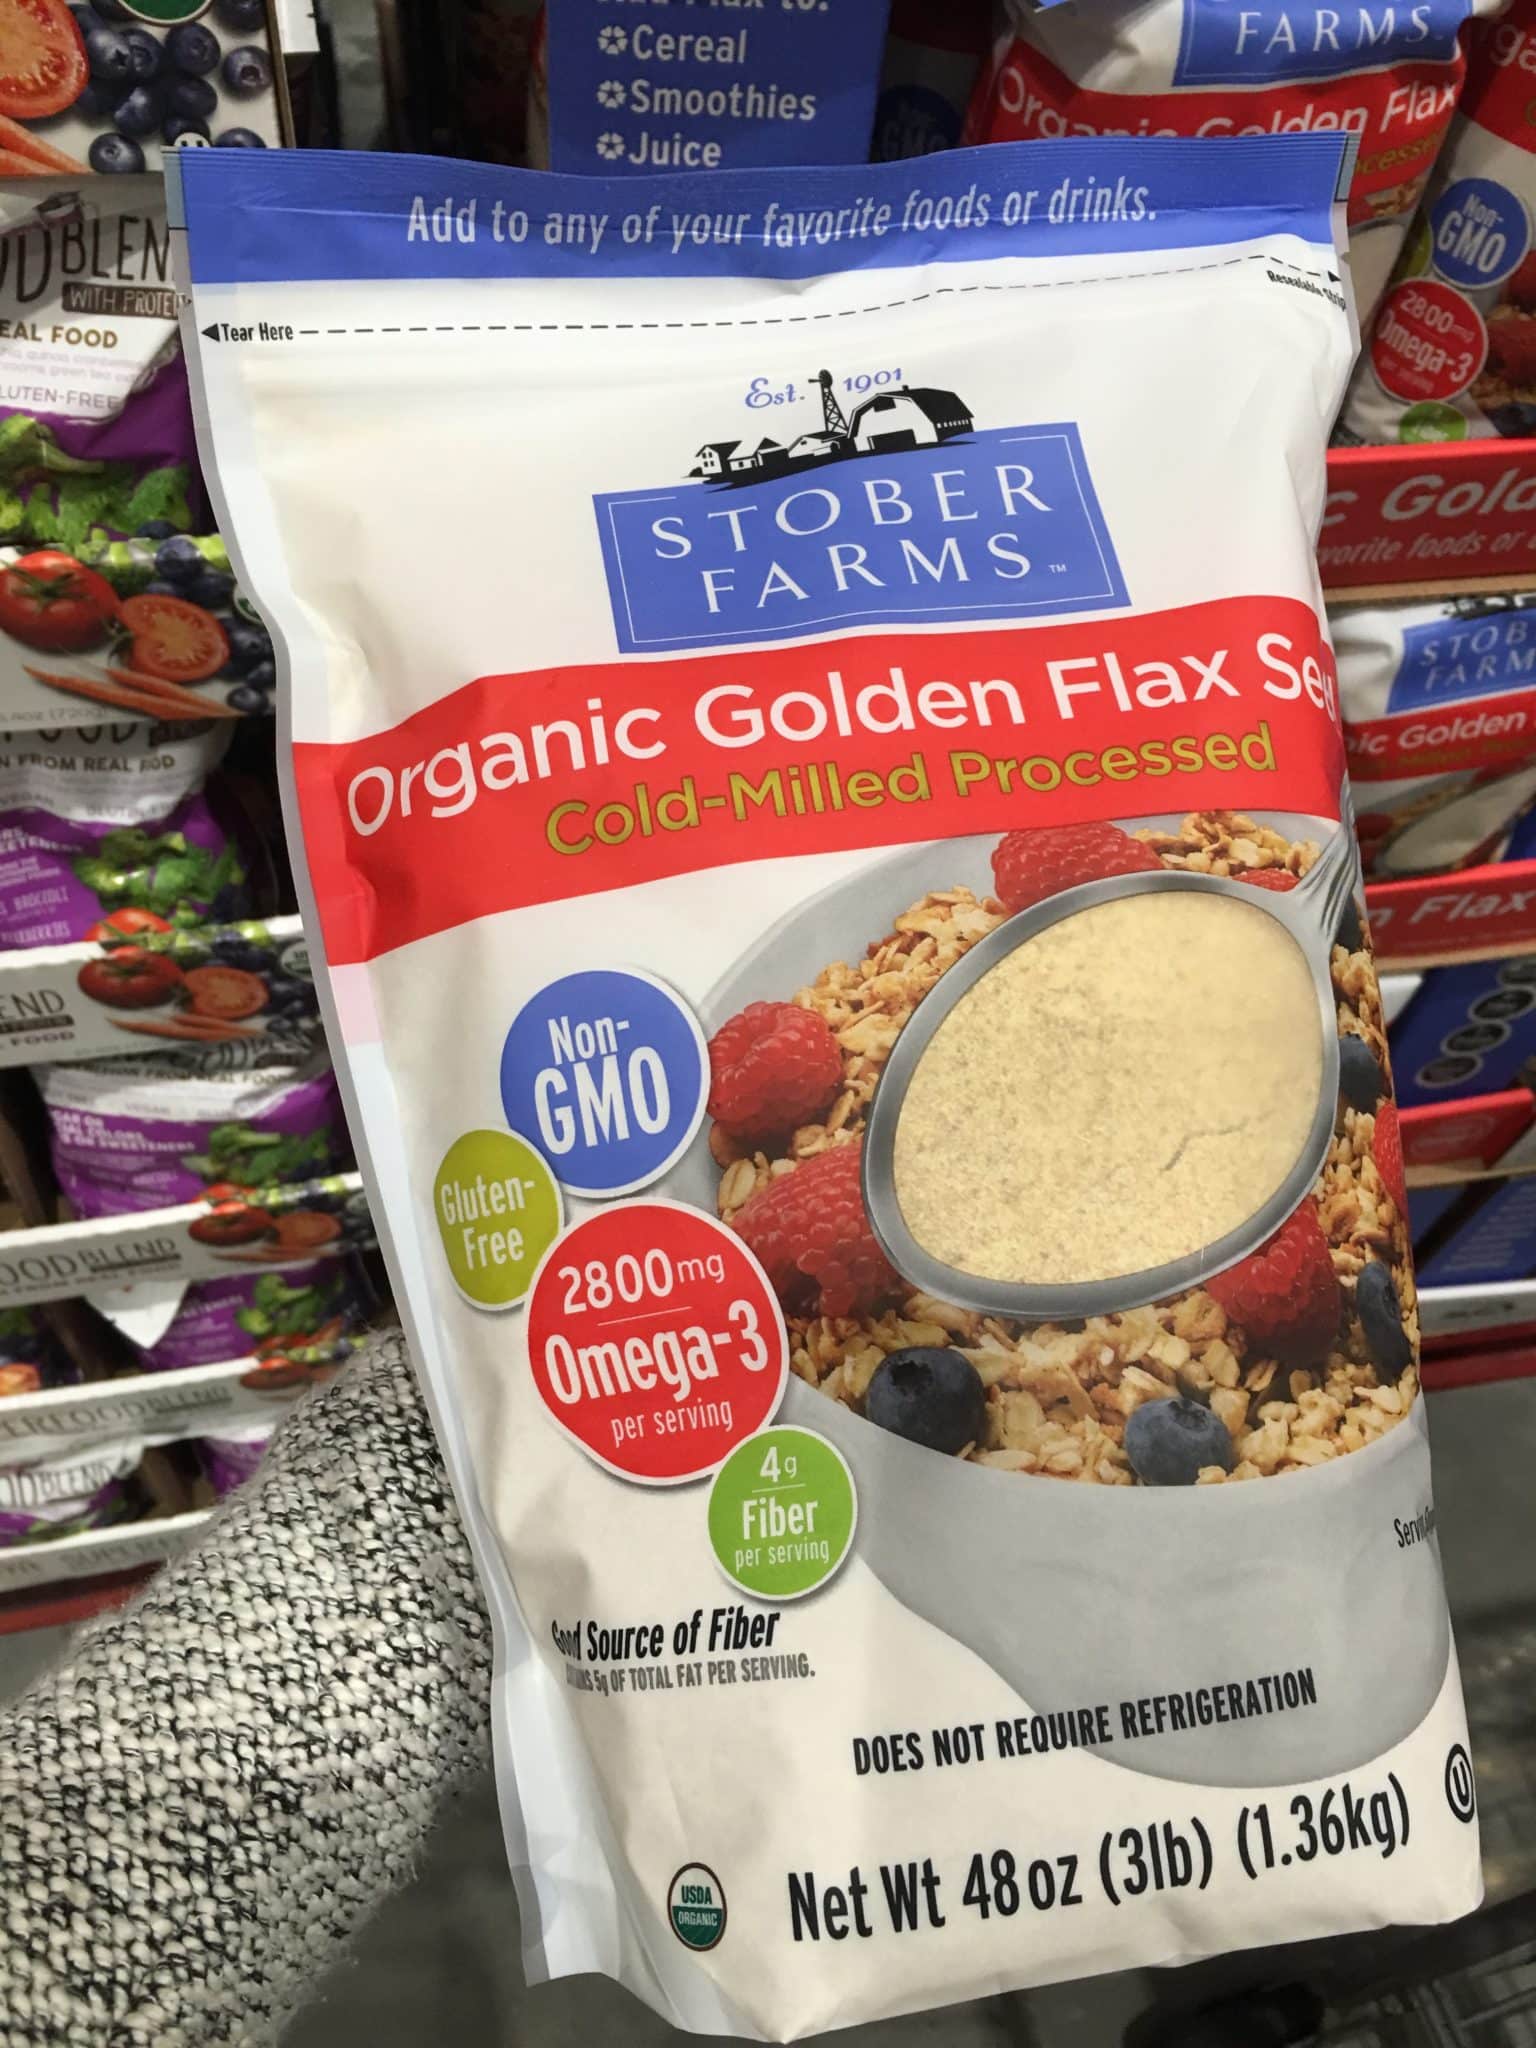 Organic golden flax seed from Costco